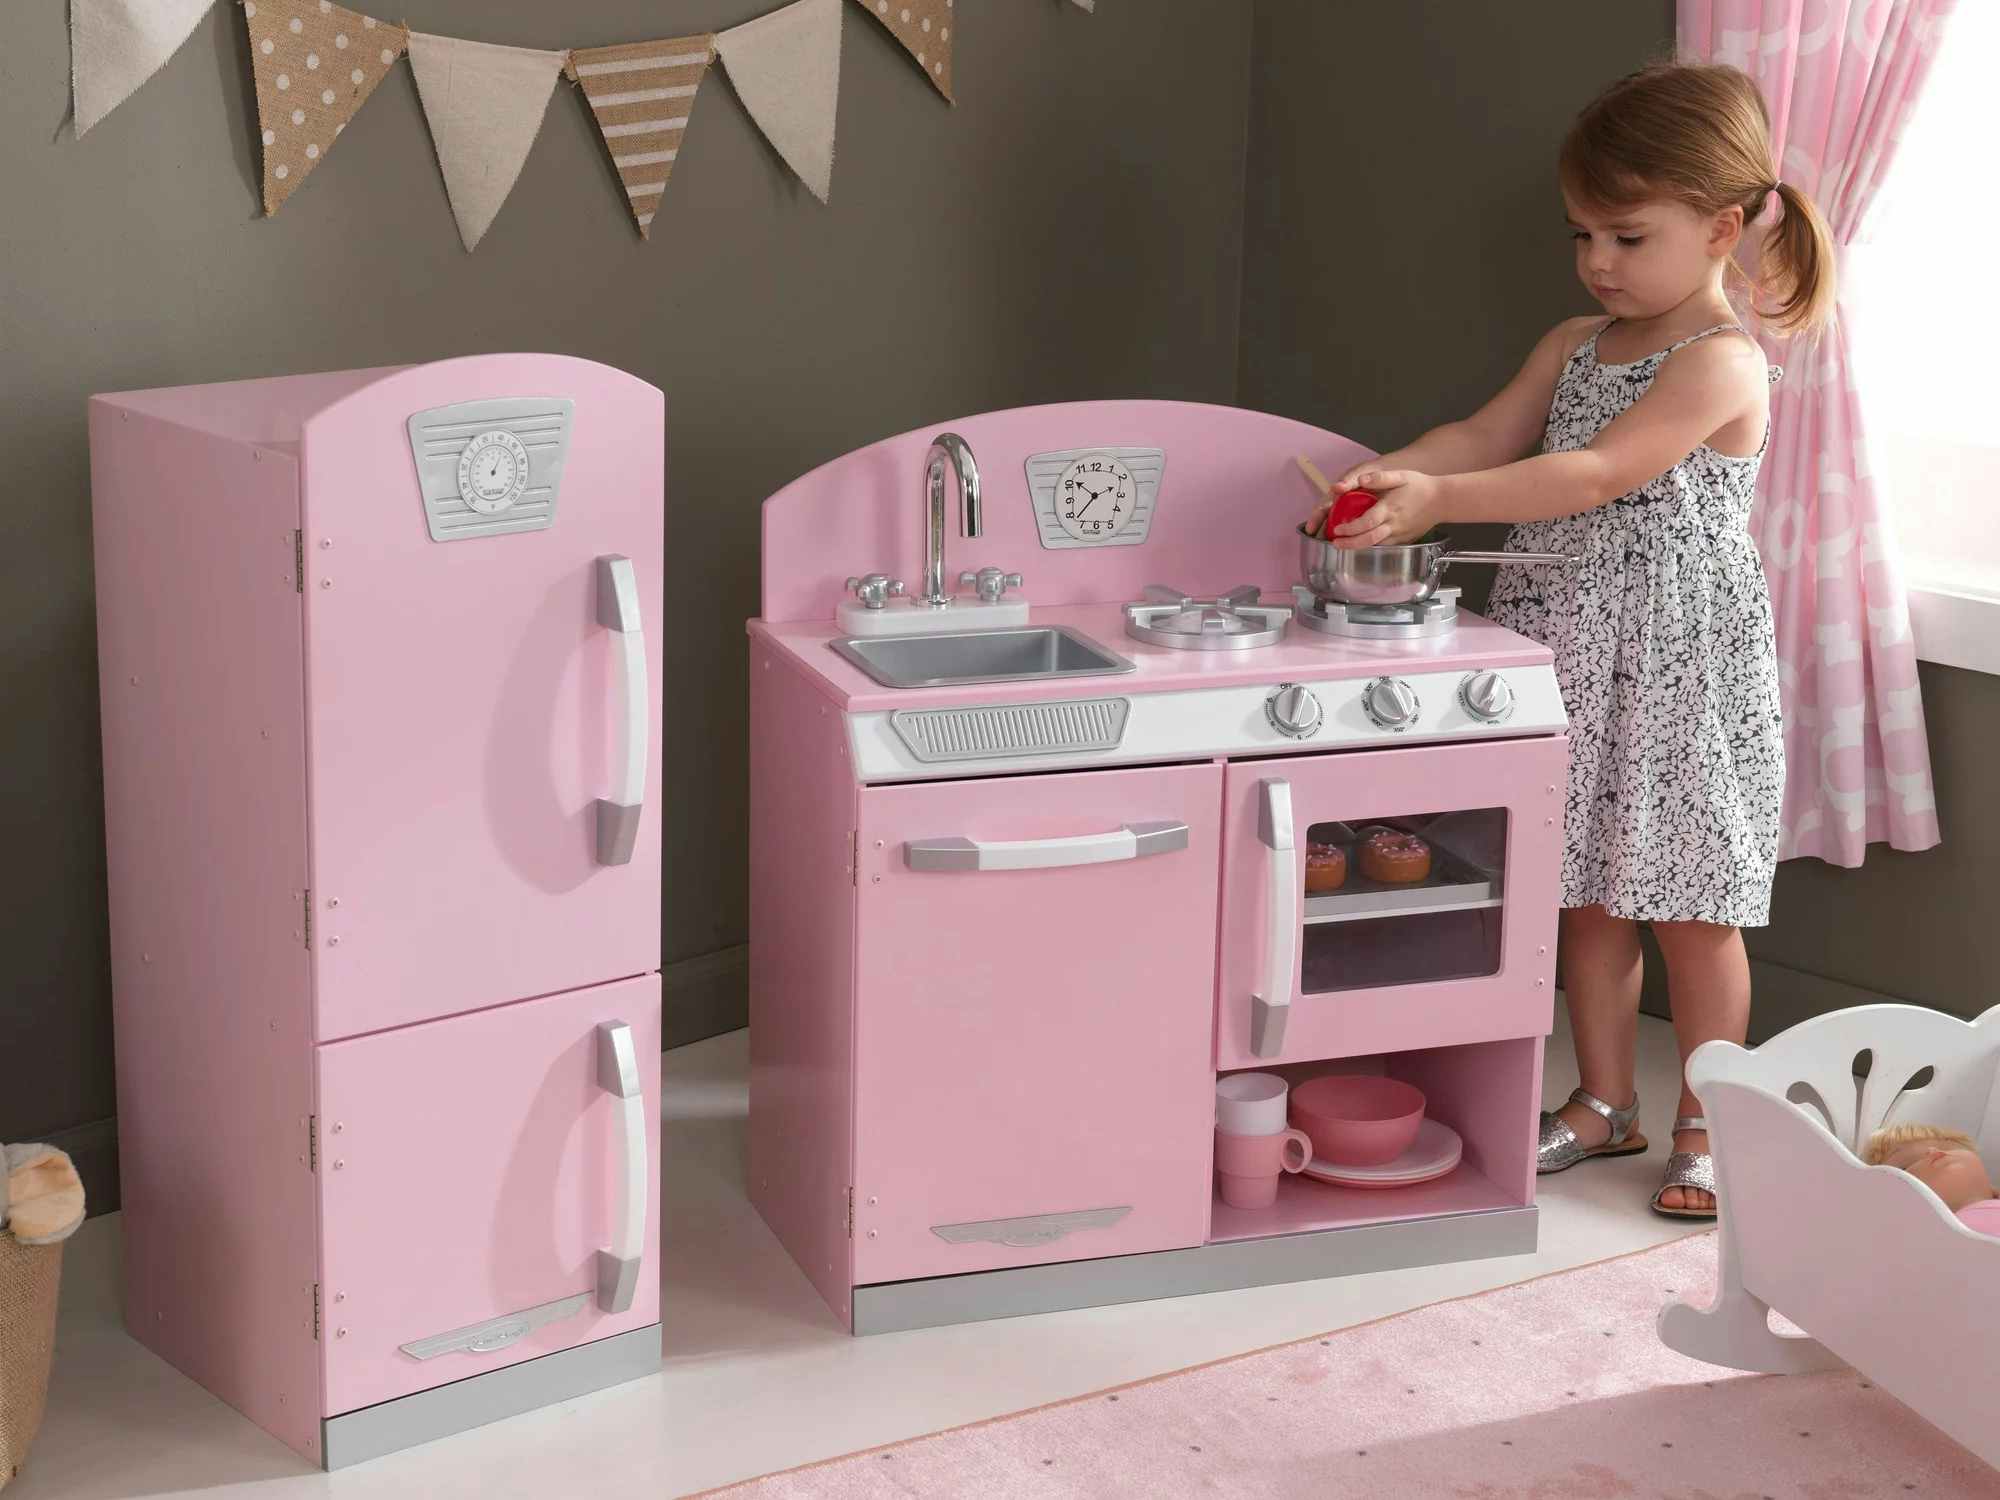 a little girl playing with a kidcraft retro kitchen